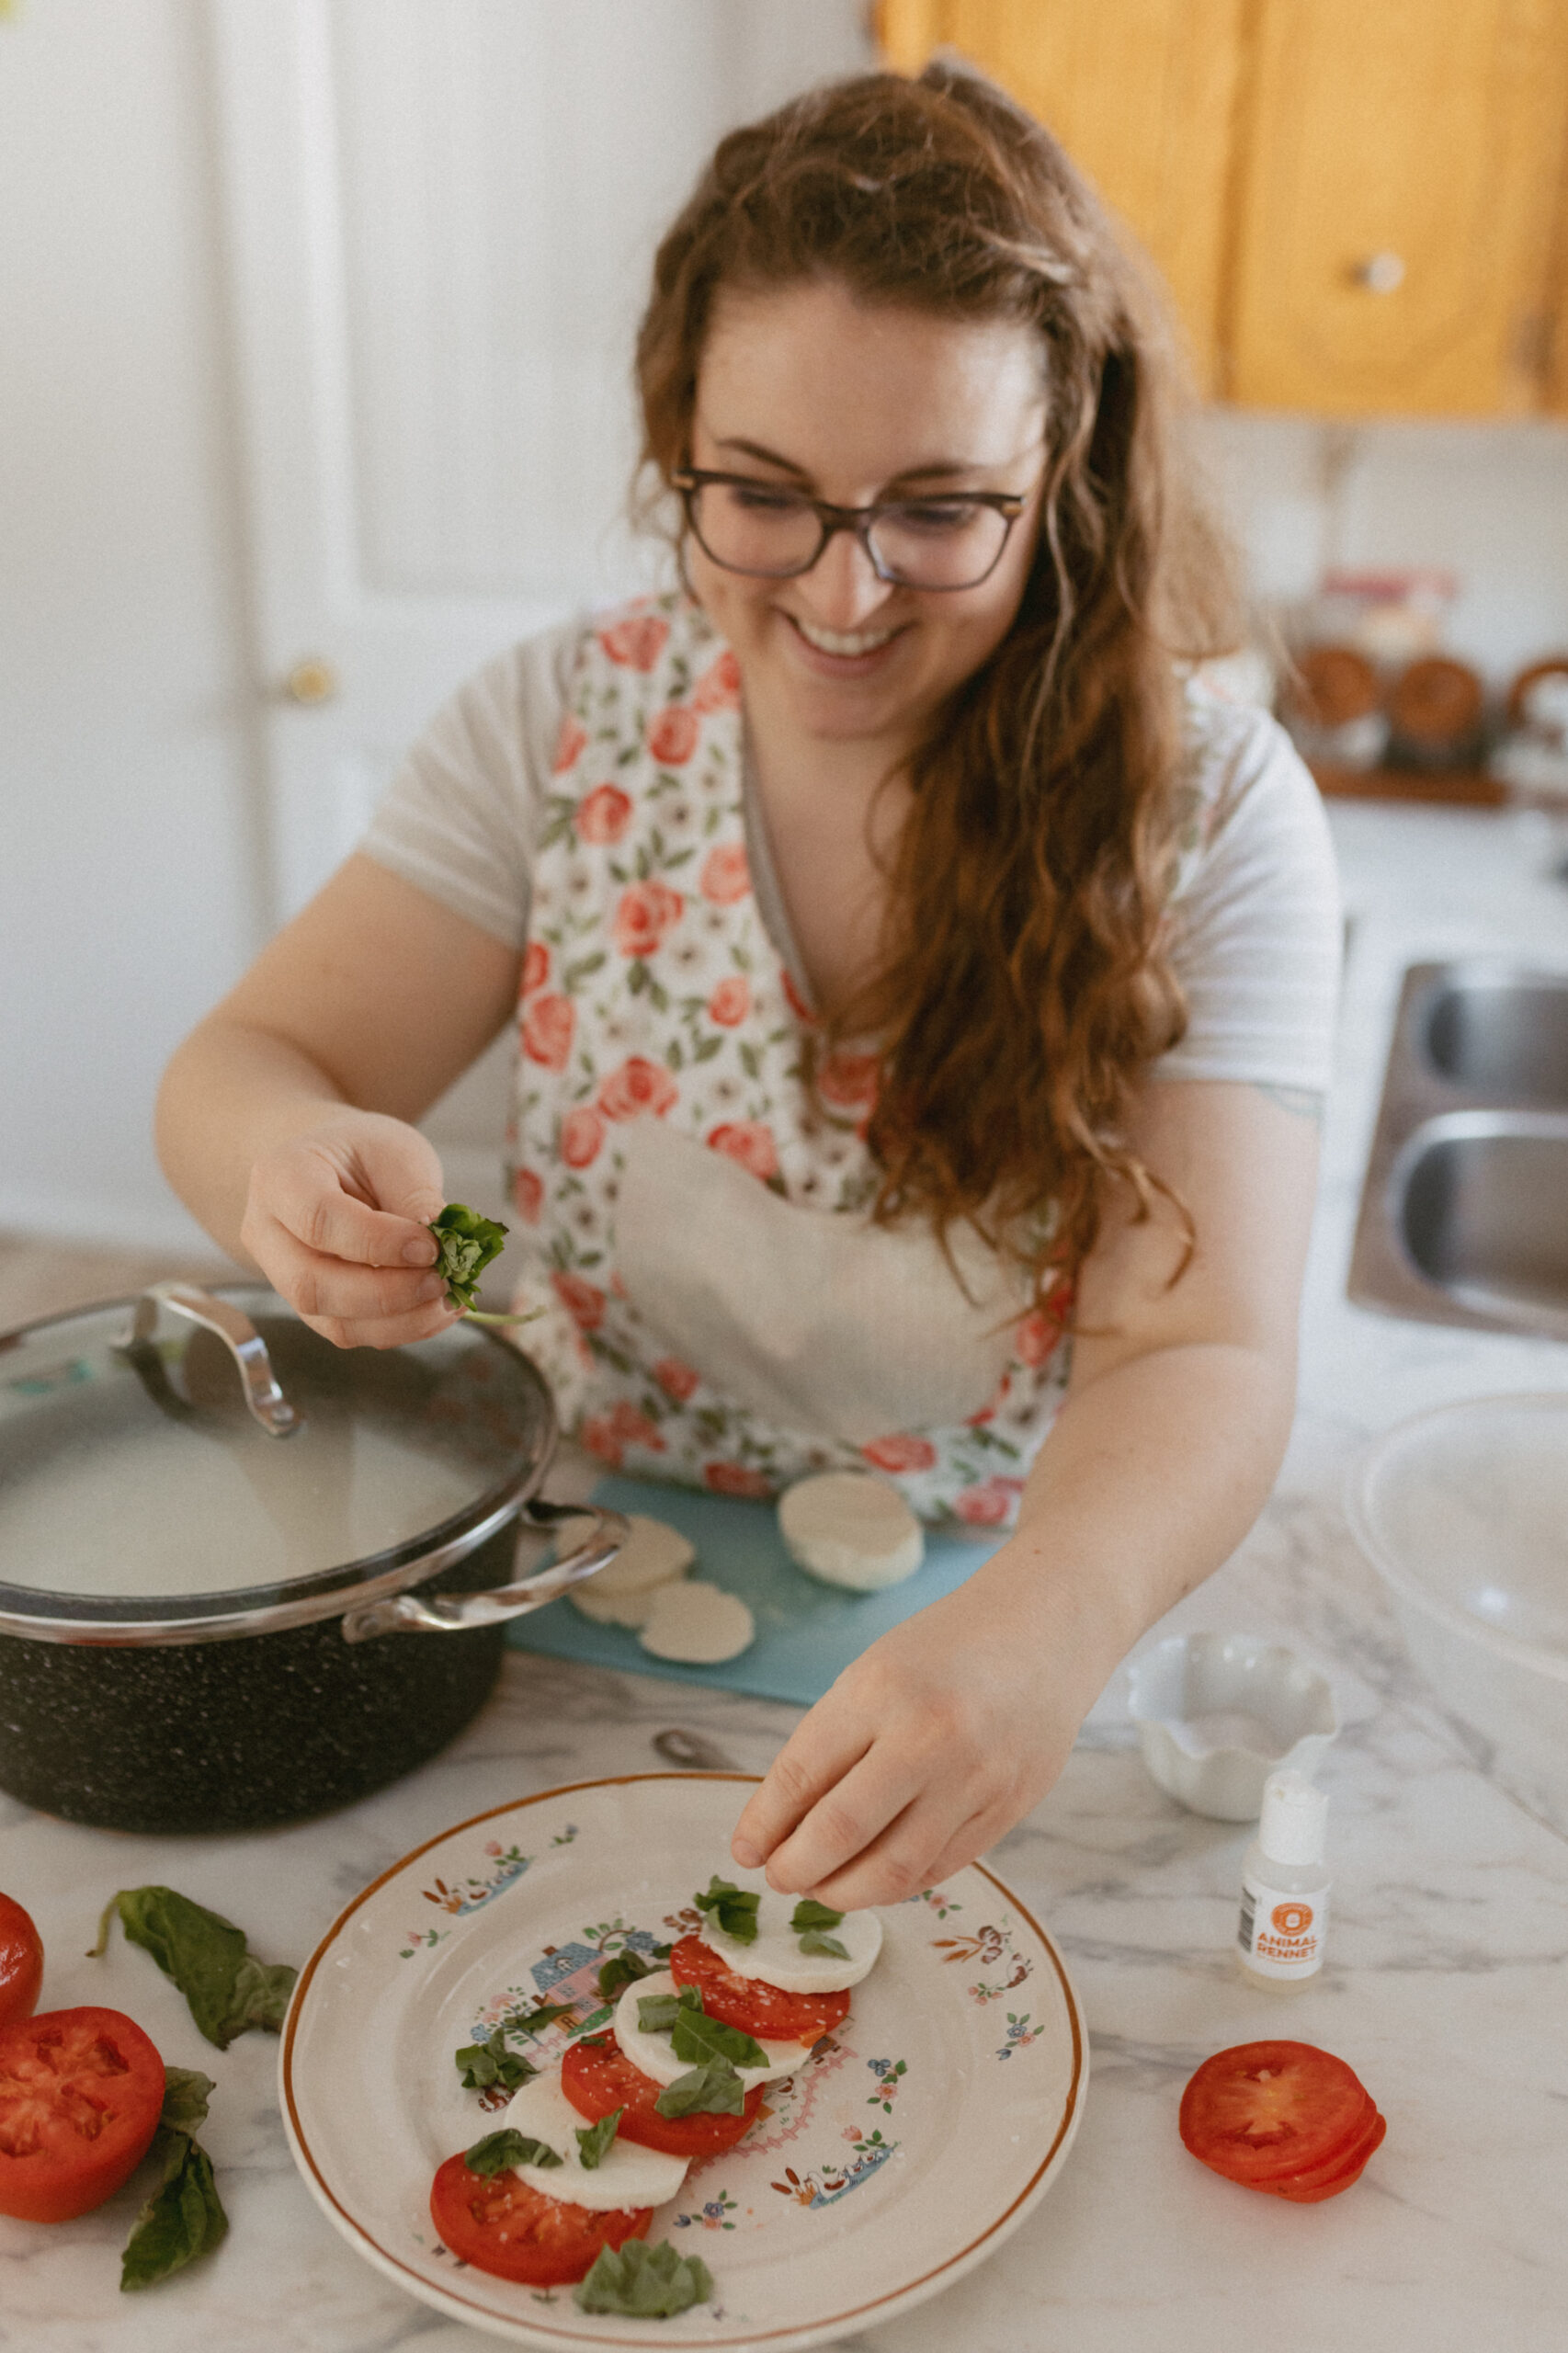 A woman assembles a caprese salad with freshly made cheese, basil, and tomato slices on a decorative plate, exemplifying a homemade dish with the cheese.